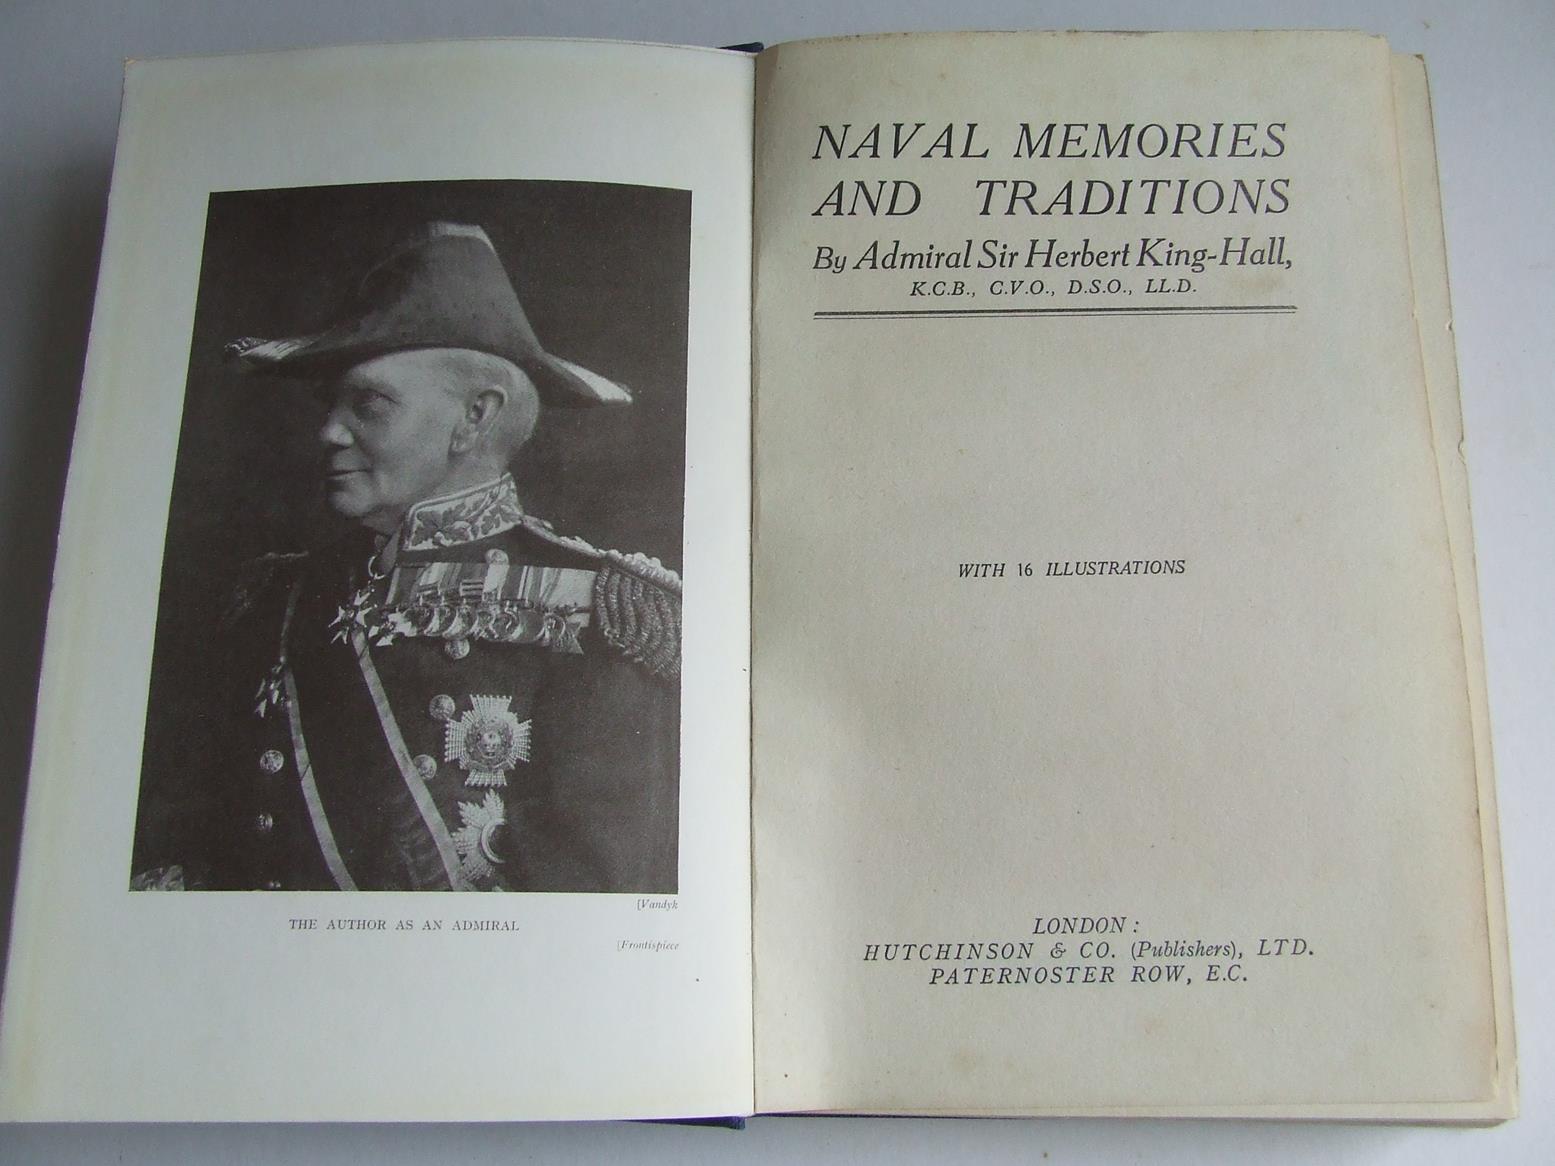 Naval Memories and Traditions